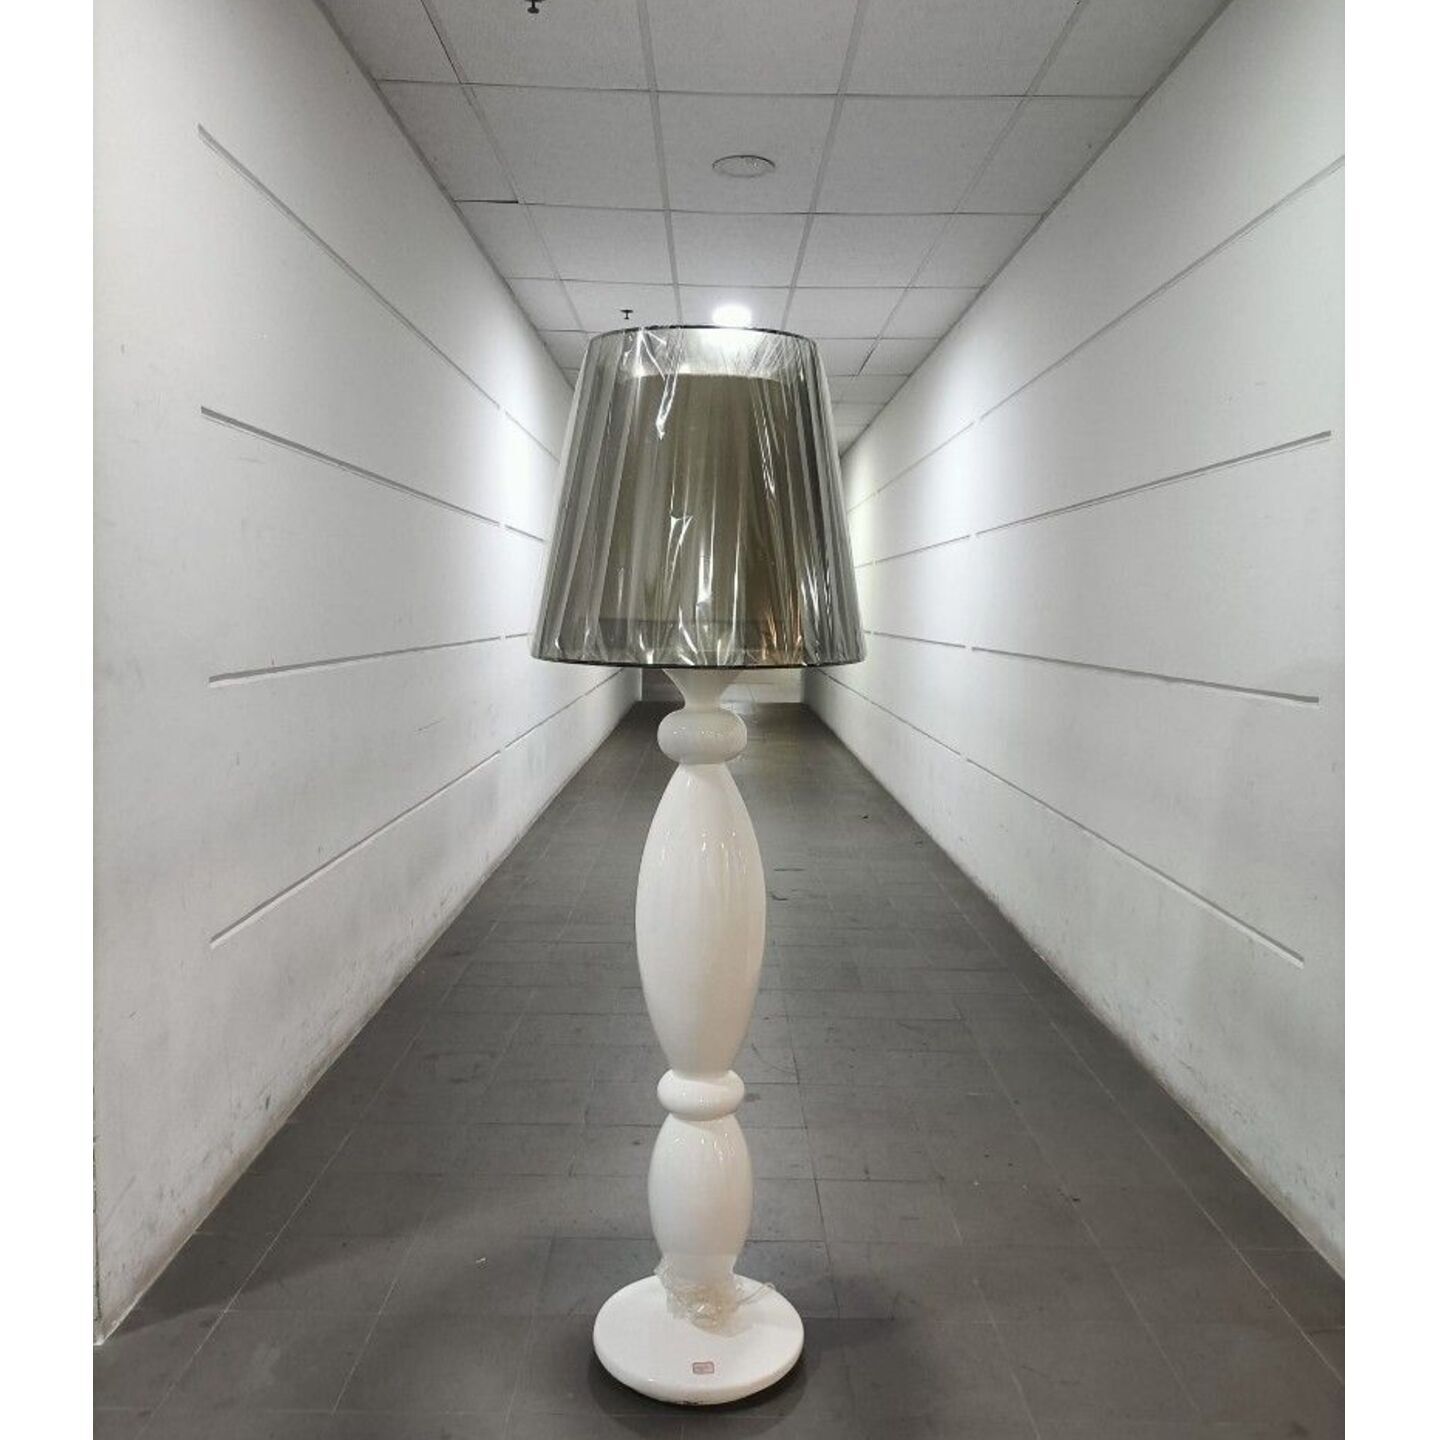 ROSANNE White Floor Standing Lamp with Shade MD30054-3-600